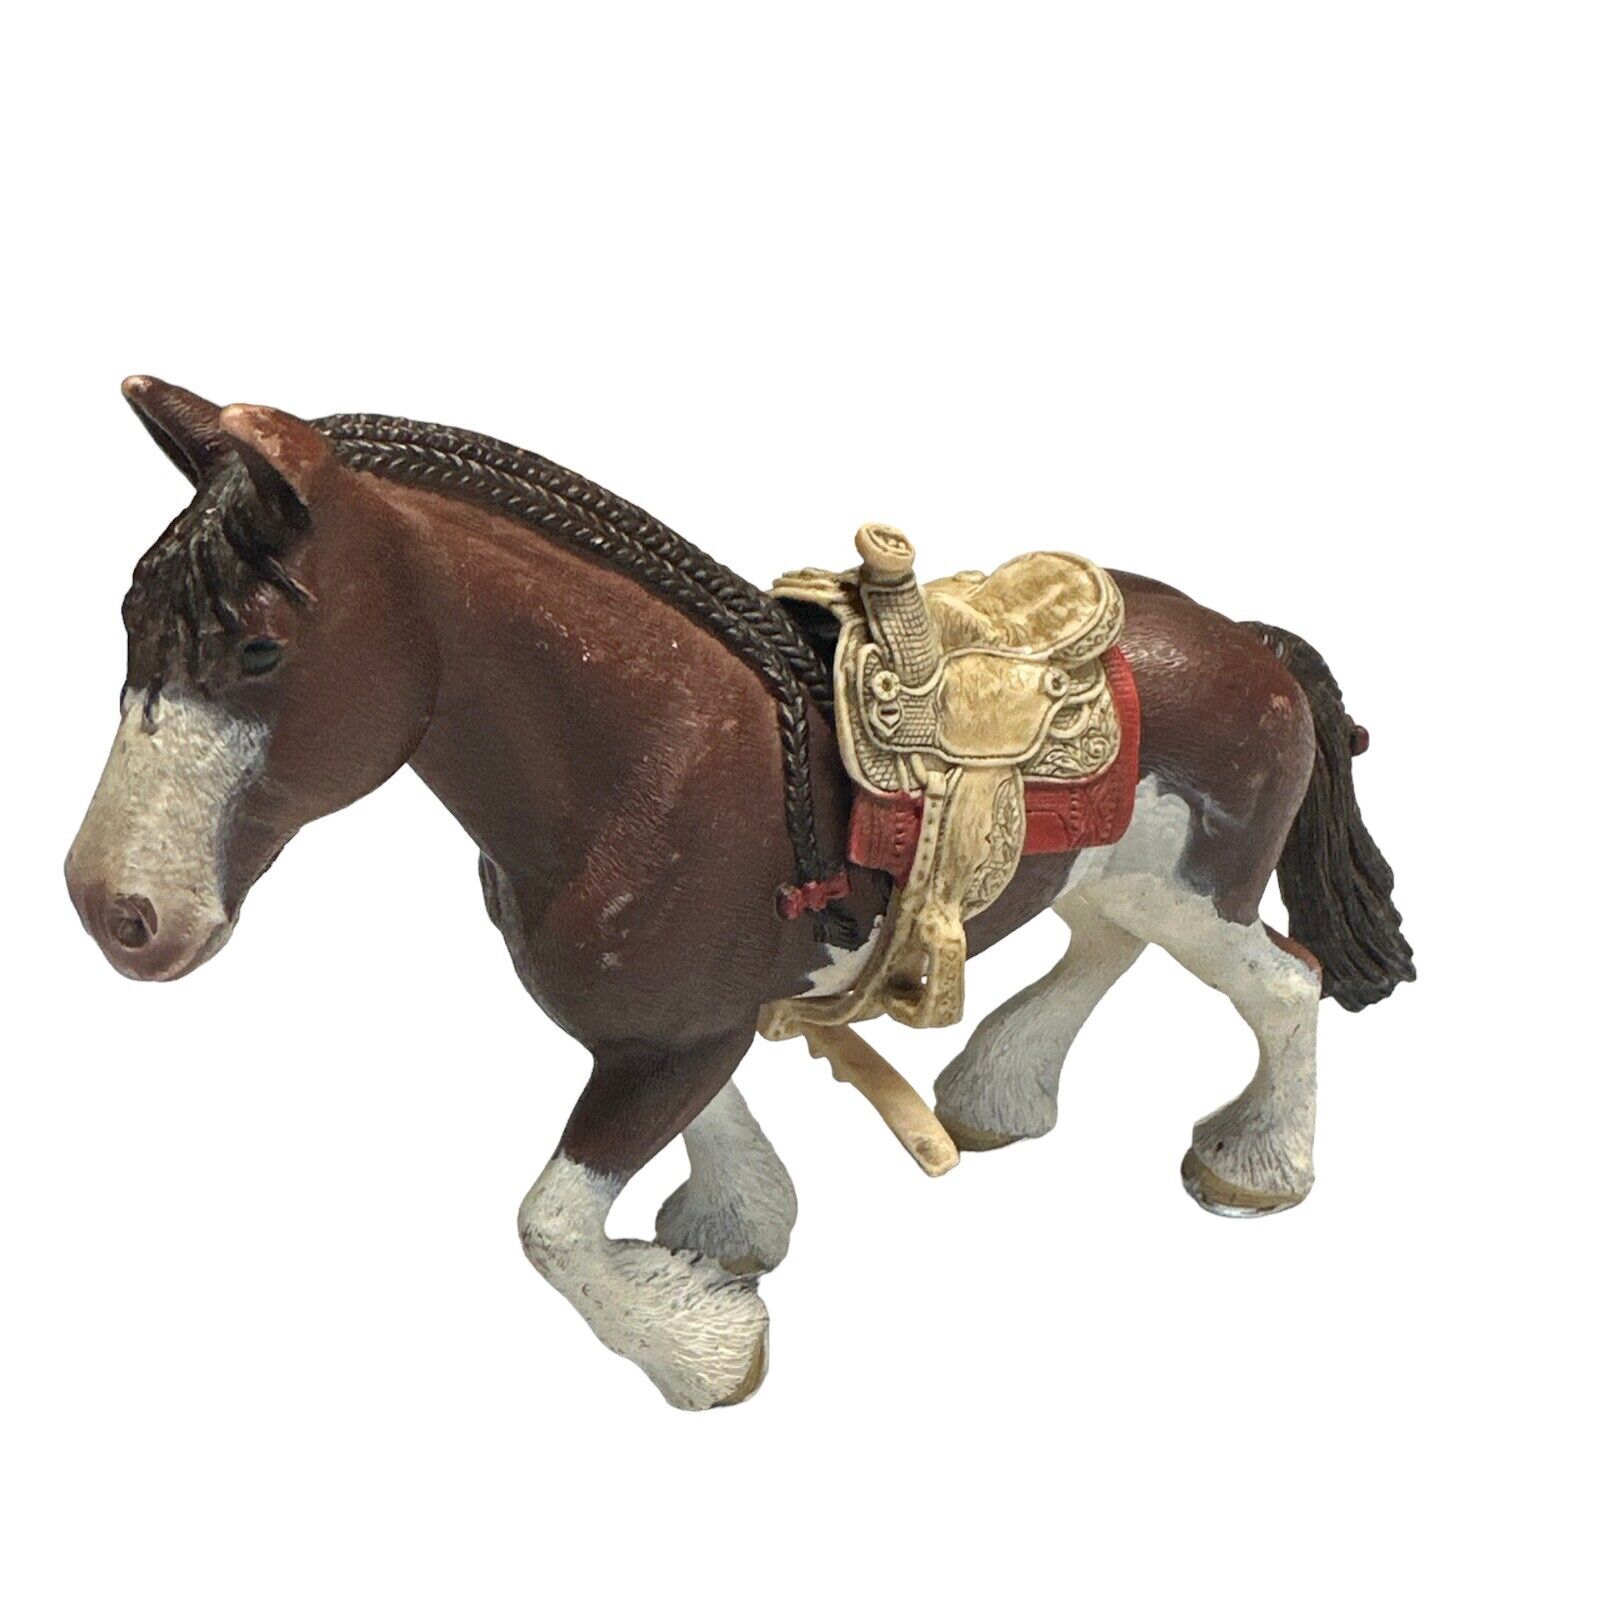 Schleich Am Lines 69 Horse - Brown And White - With Saddle 